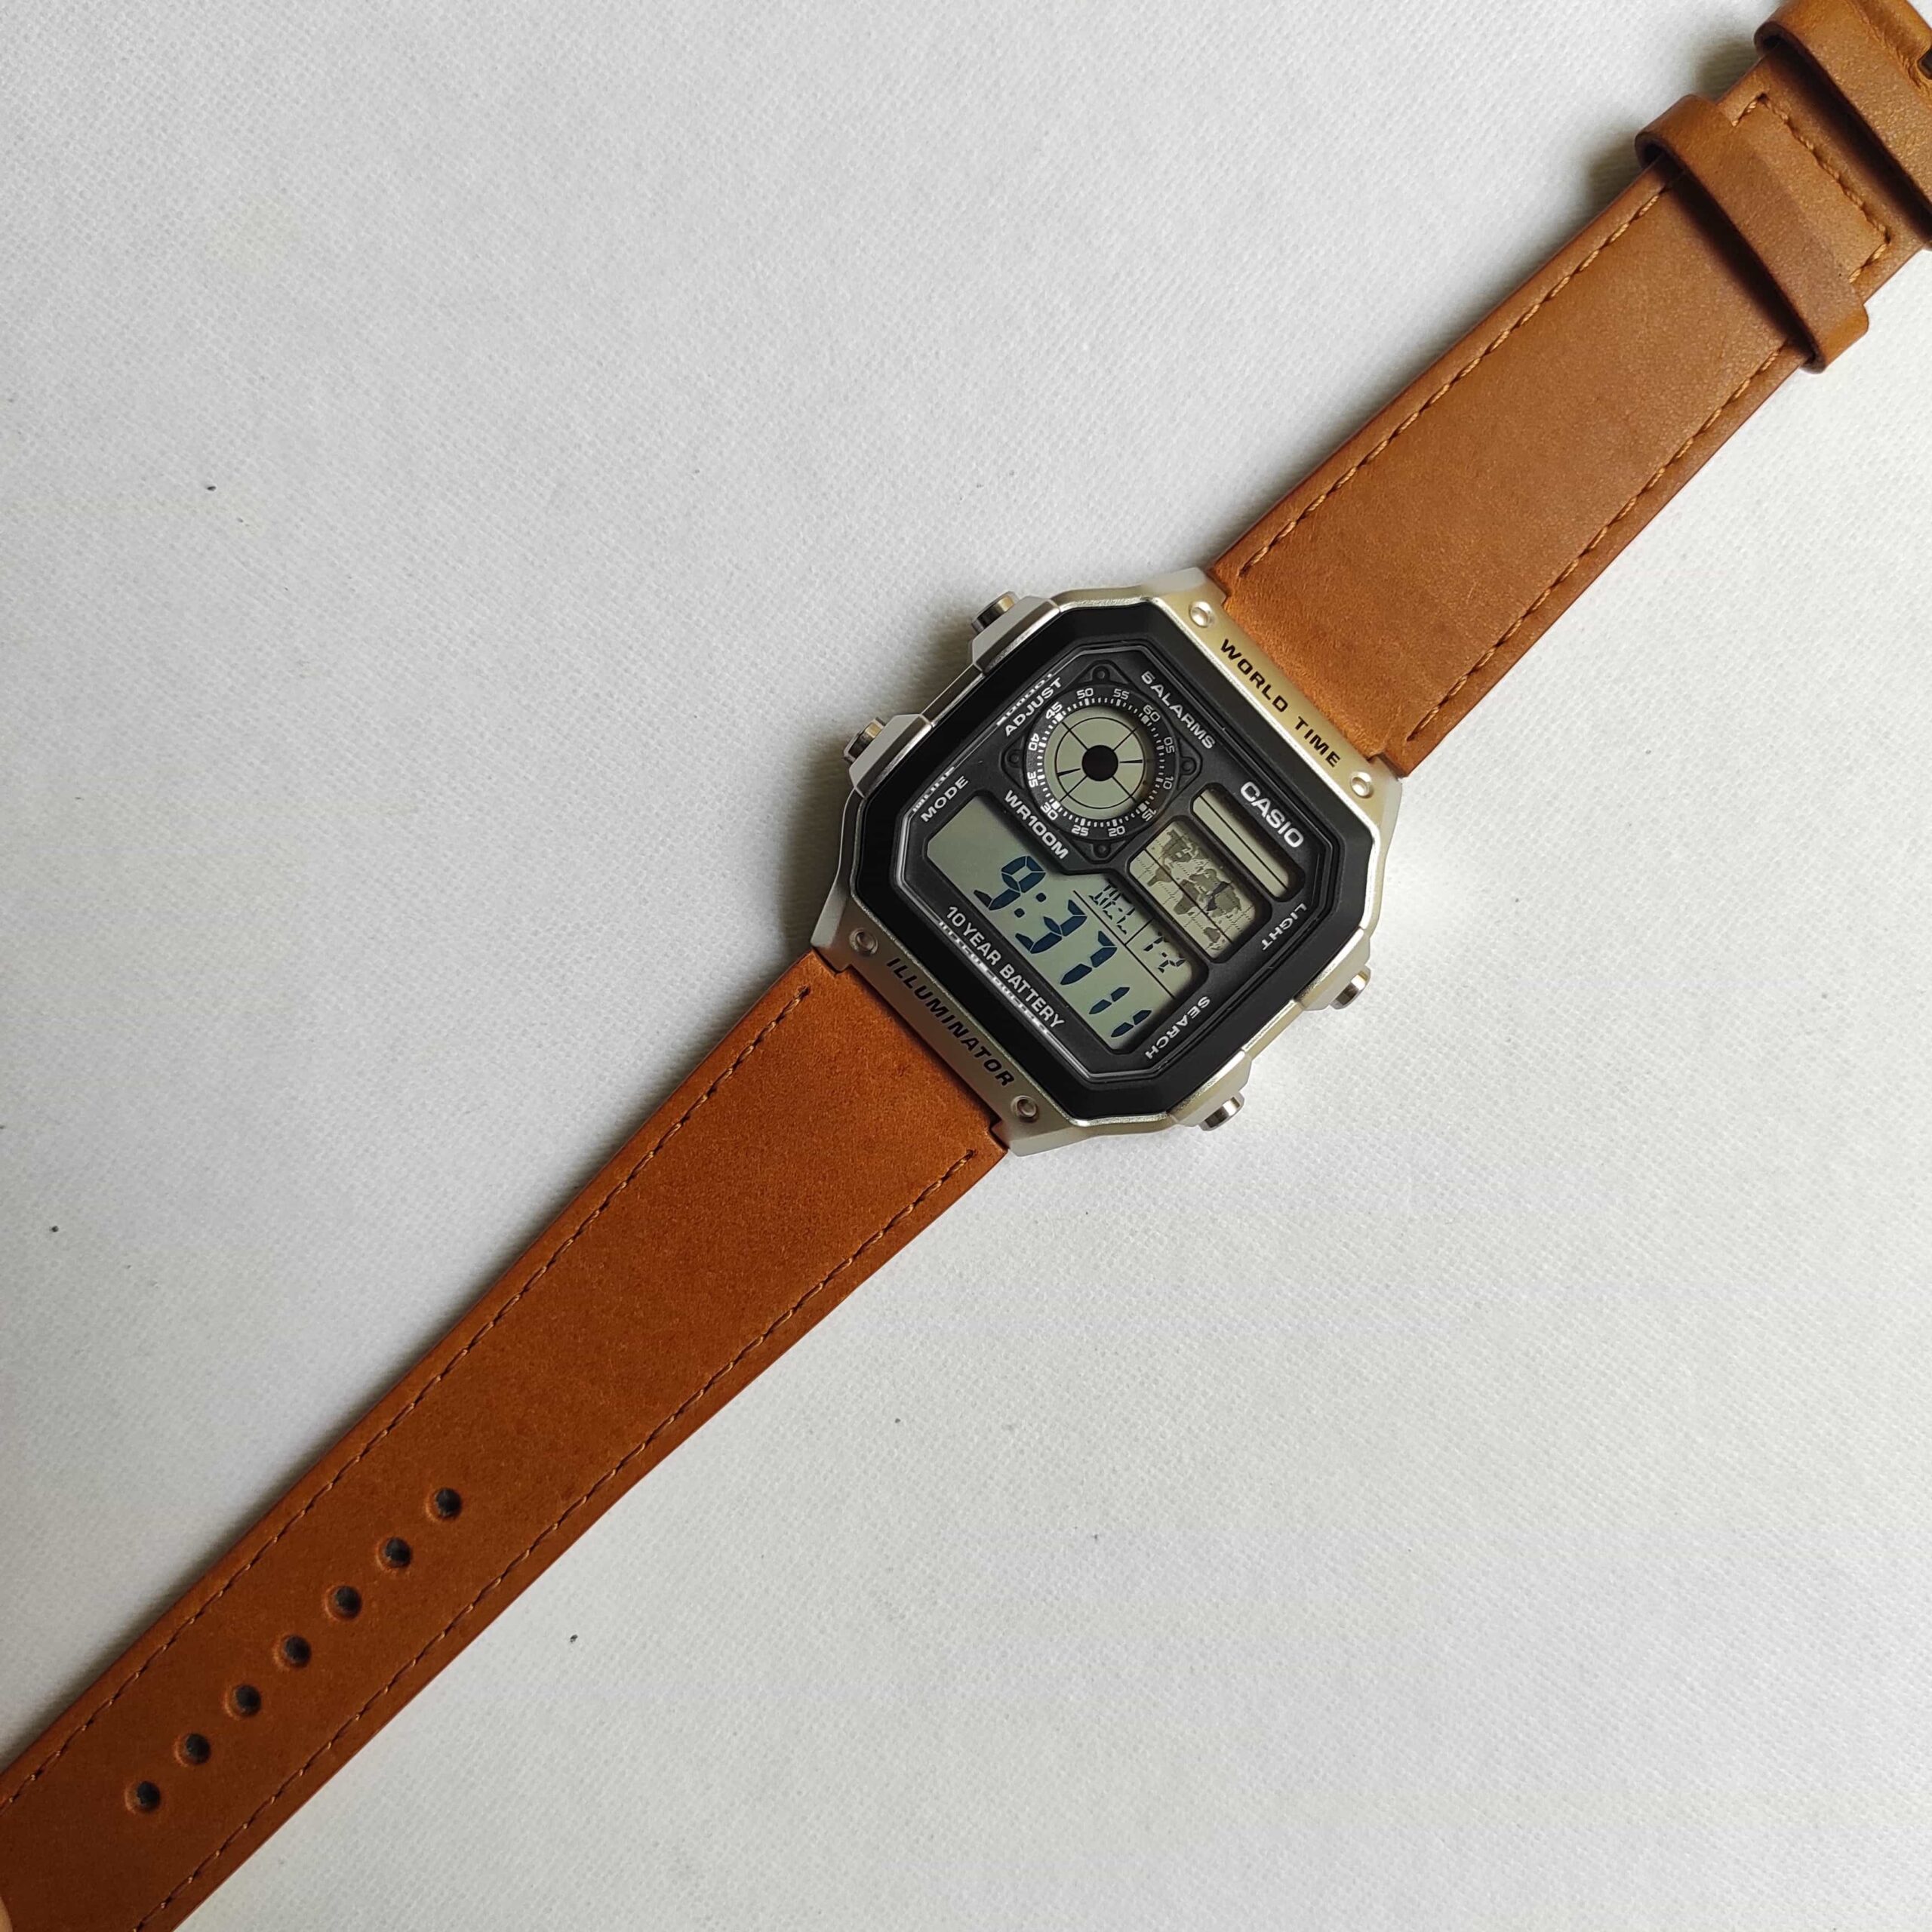 Fitted Tan Leather Strap the Casio AE1200 - Ajwain watches